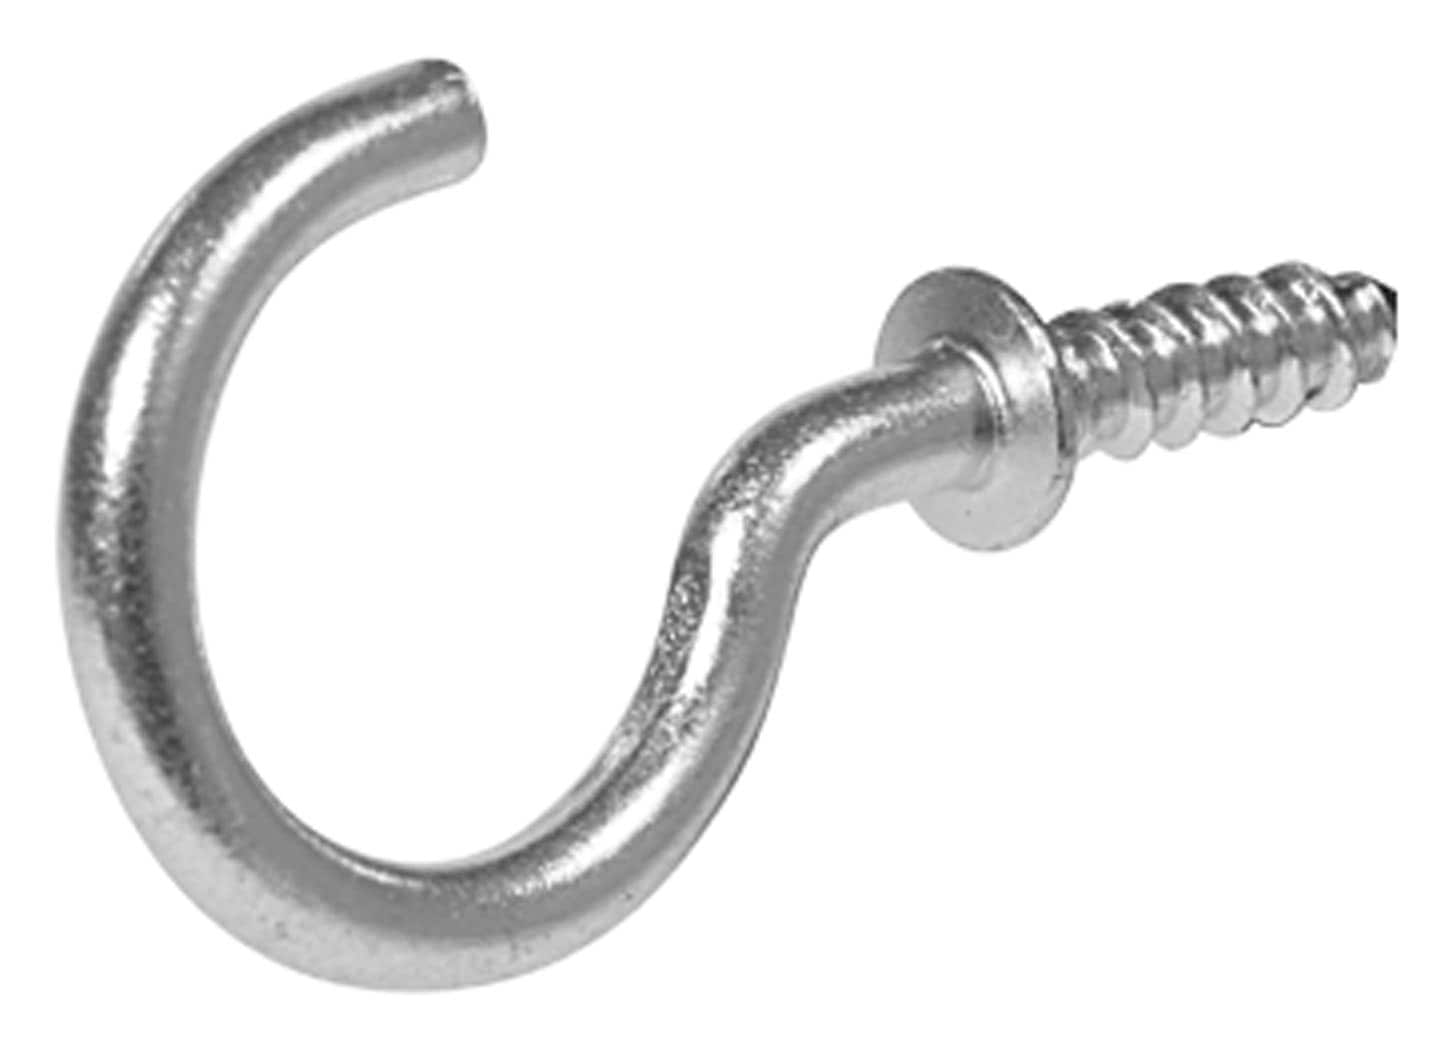 Premier Stainless Solutions 8” x 4” Long Stainless Steel Threaded Eyebolts, T316 Marine Grade Lot of 100 - 3